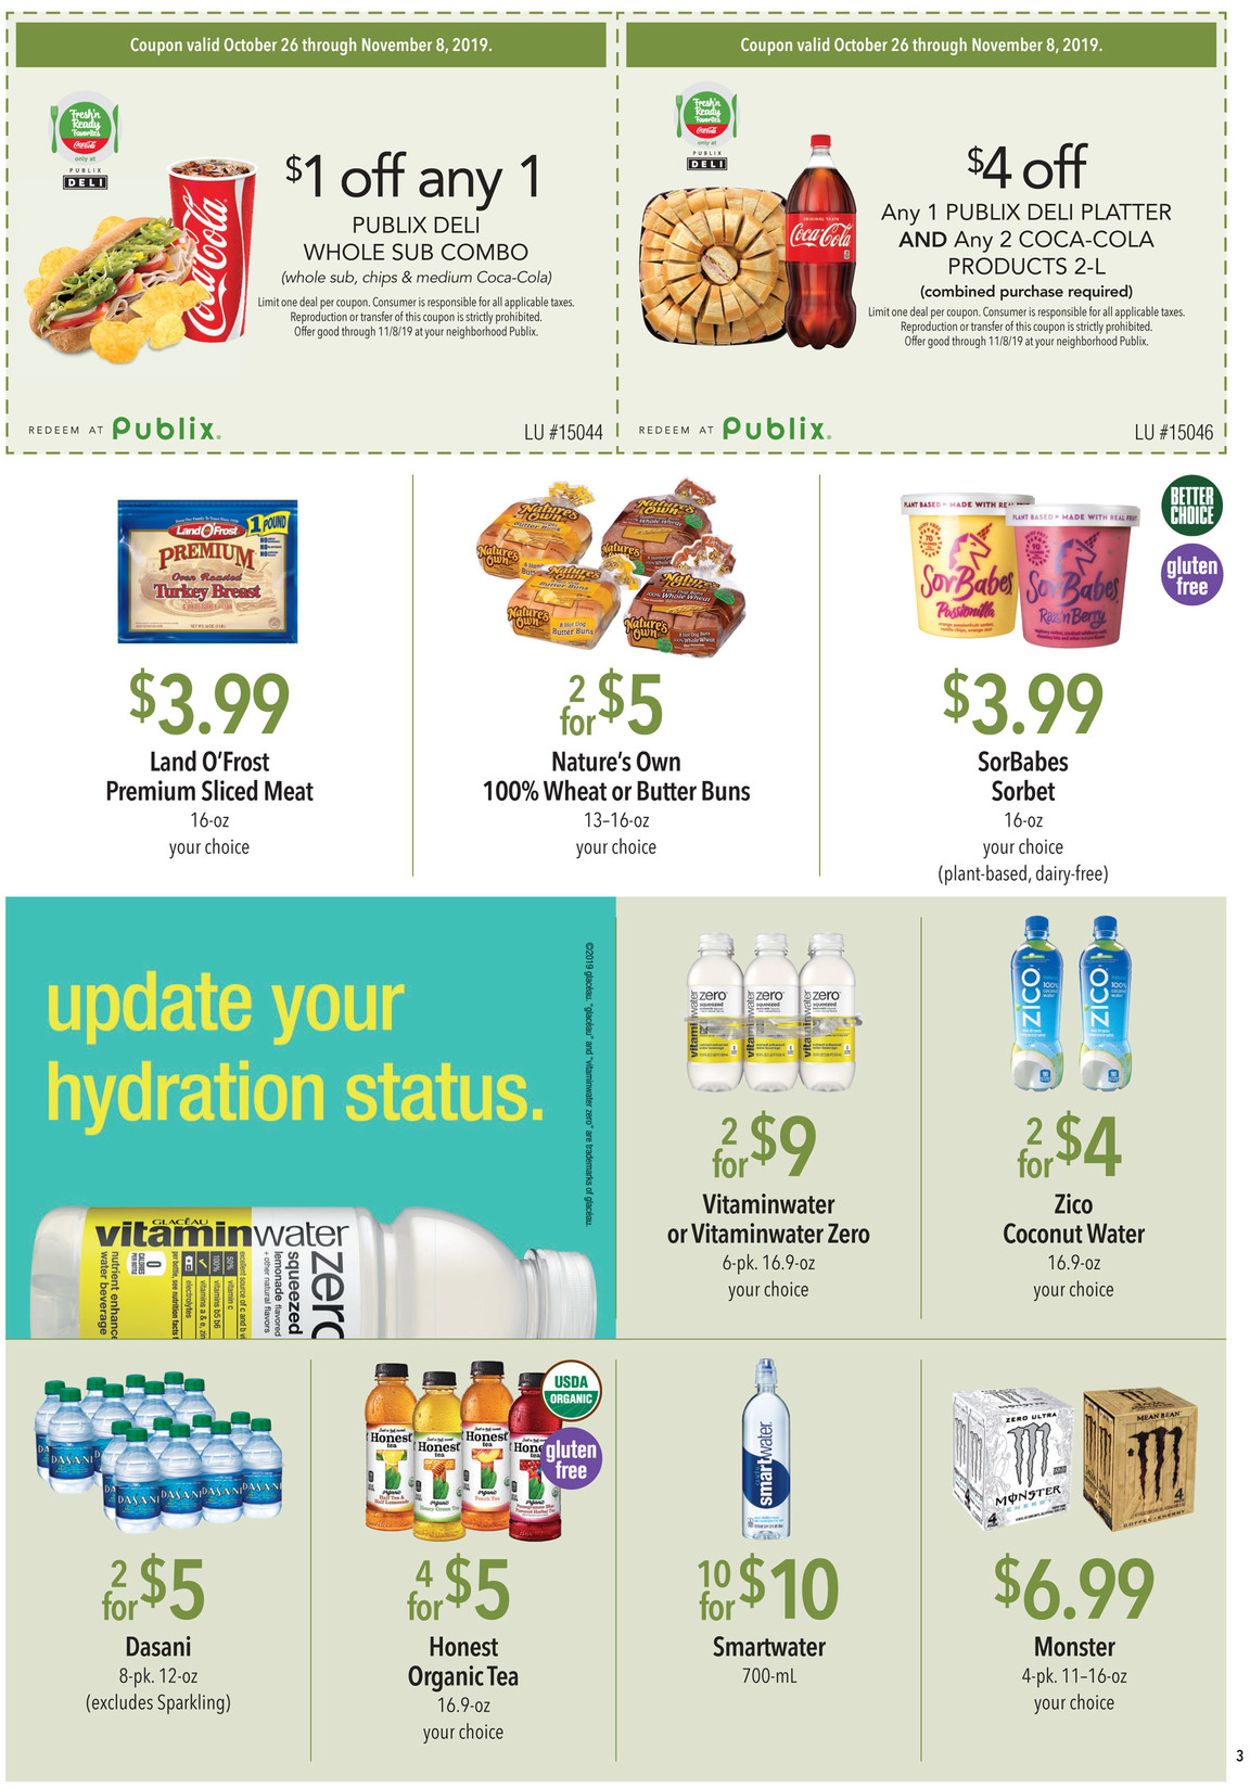 Publix Current weekly ad 10/26 - 11/08/2019 [3] - frequent-ads.com